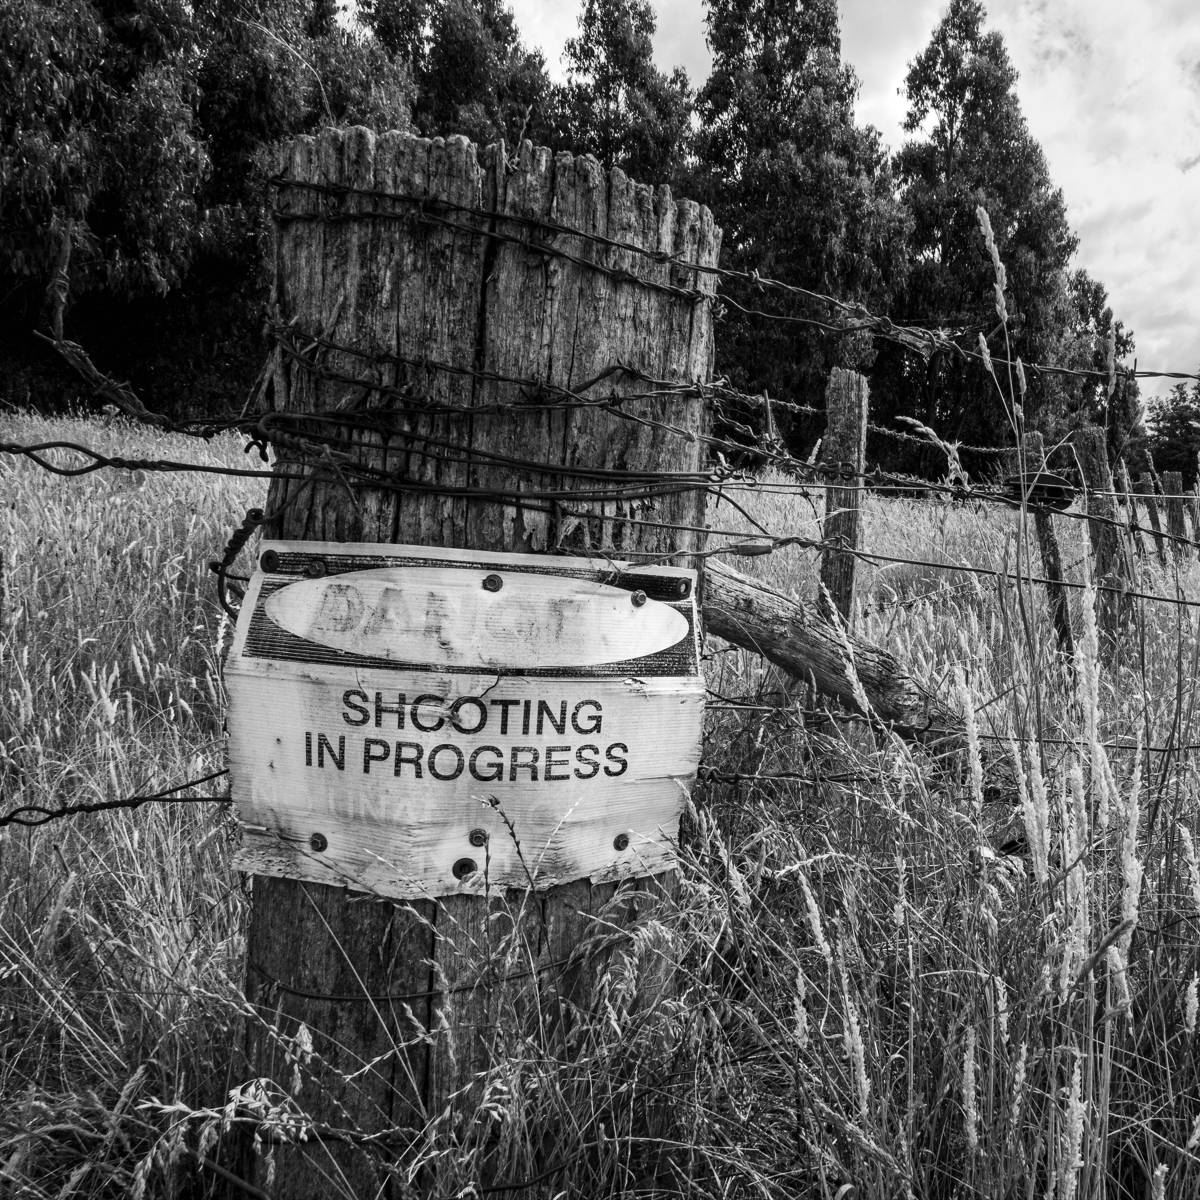 An image of a corner barbed-wire fence post in a field with a sign that reads ‘DANGER SHOOTING IN PROGRESS’. There is a row of pine trees in the background.